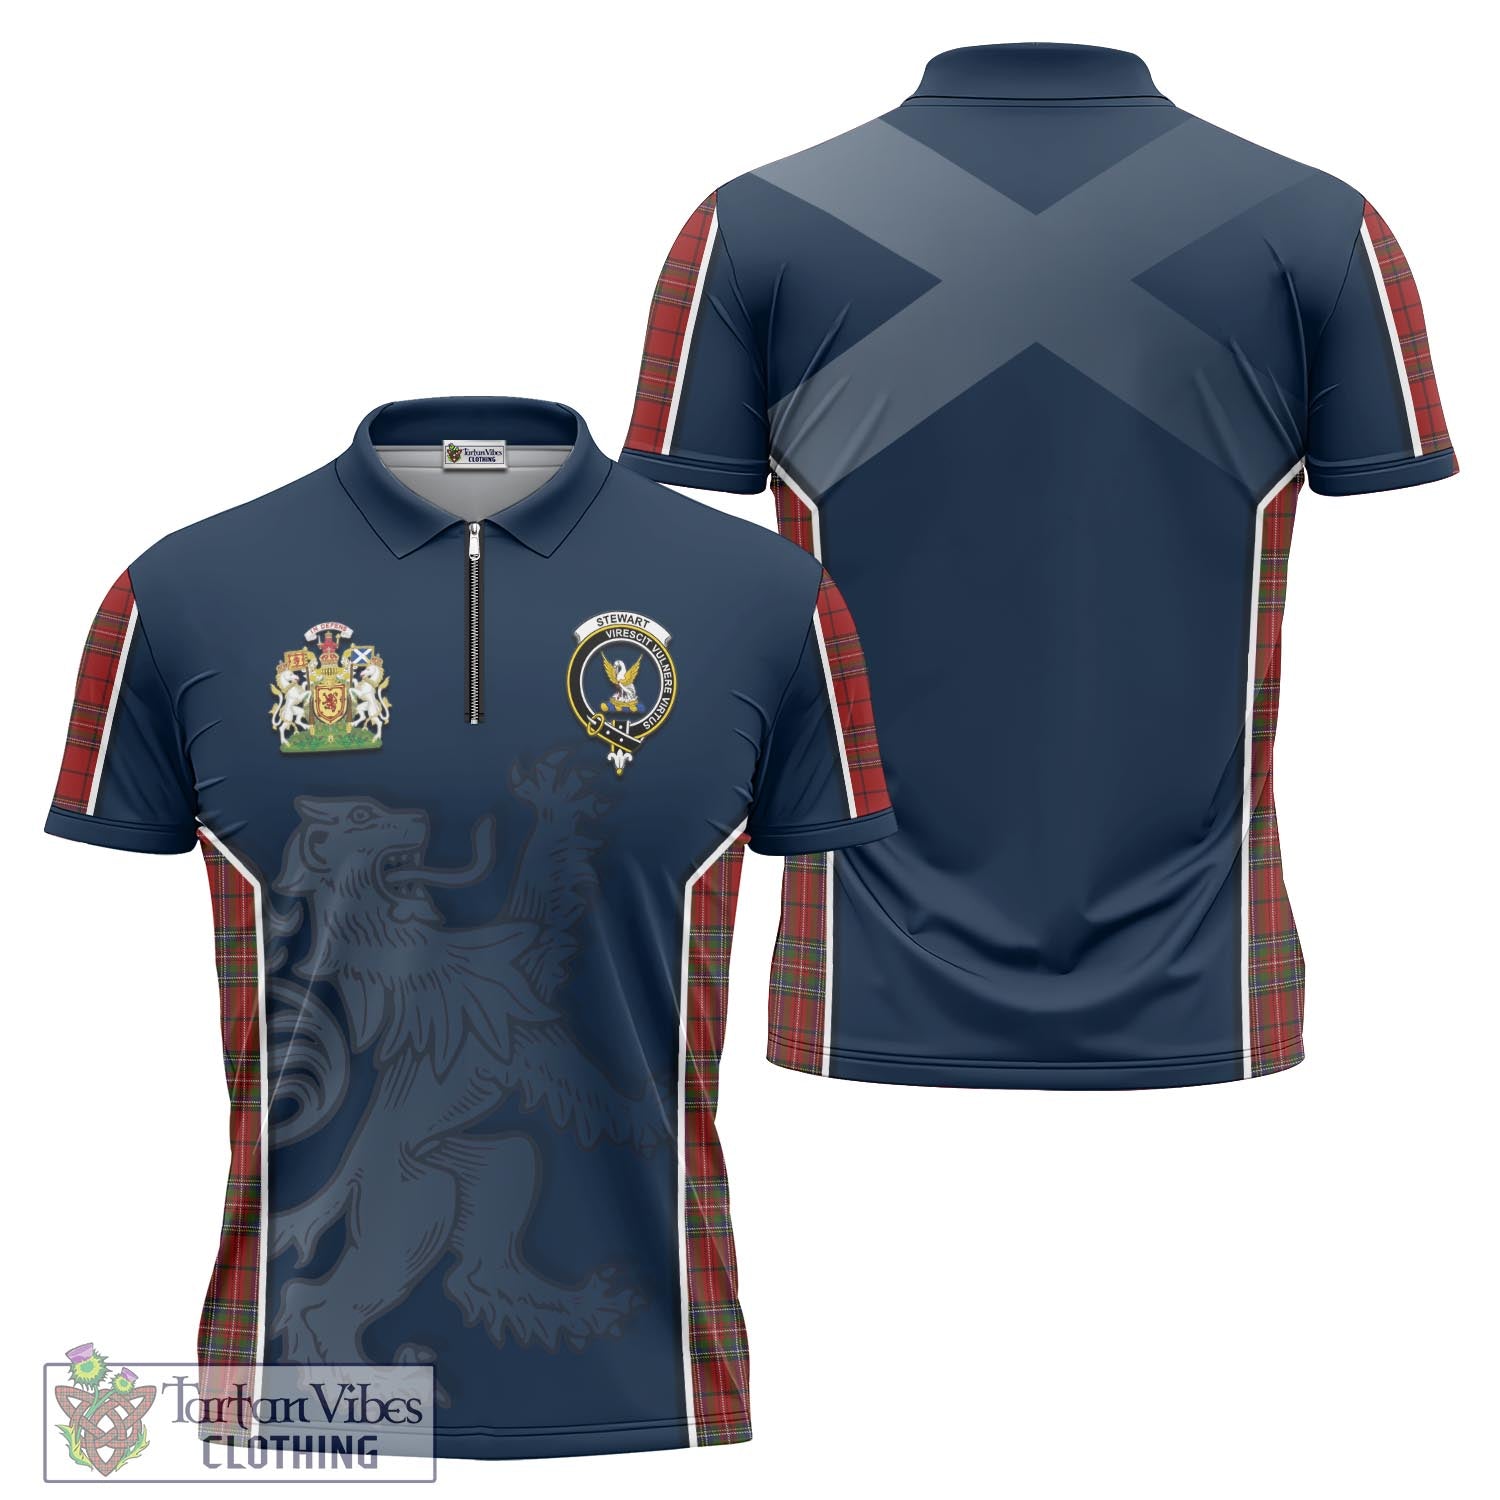 Tartan Vibes Clothing Stewart of Galloway Tartan Zipper Polo Shirt with Family Crest and Lion Rampant Vibes Sport Style